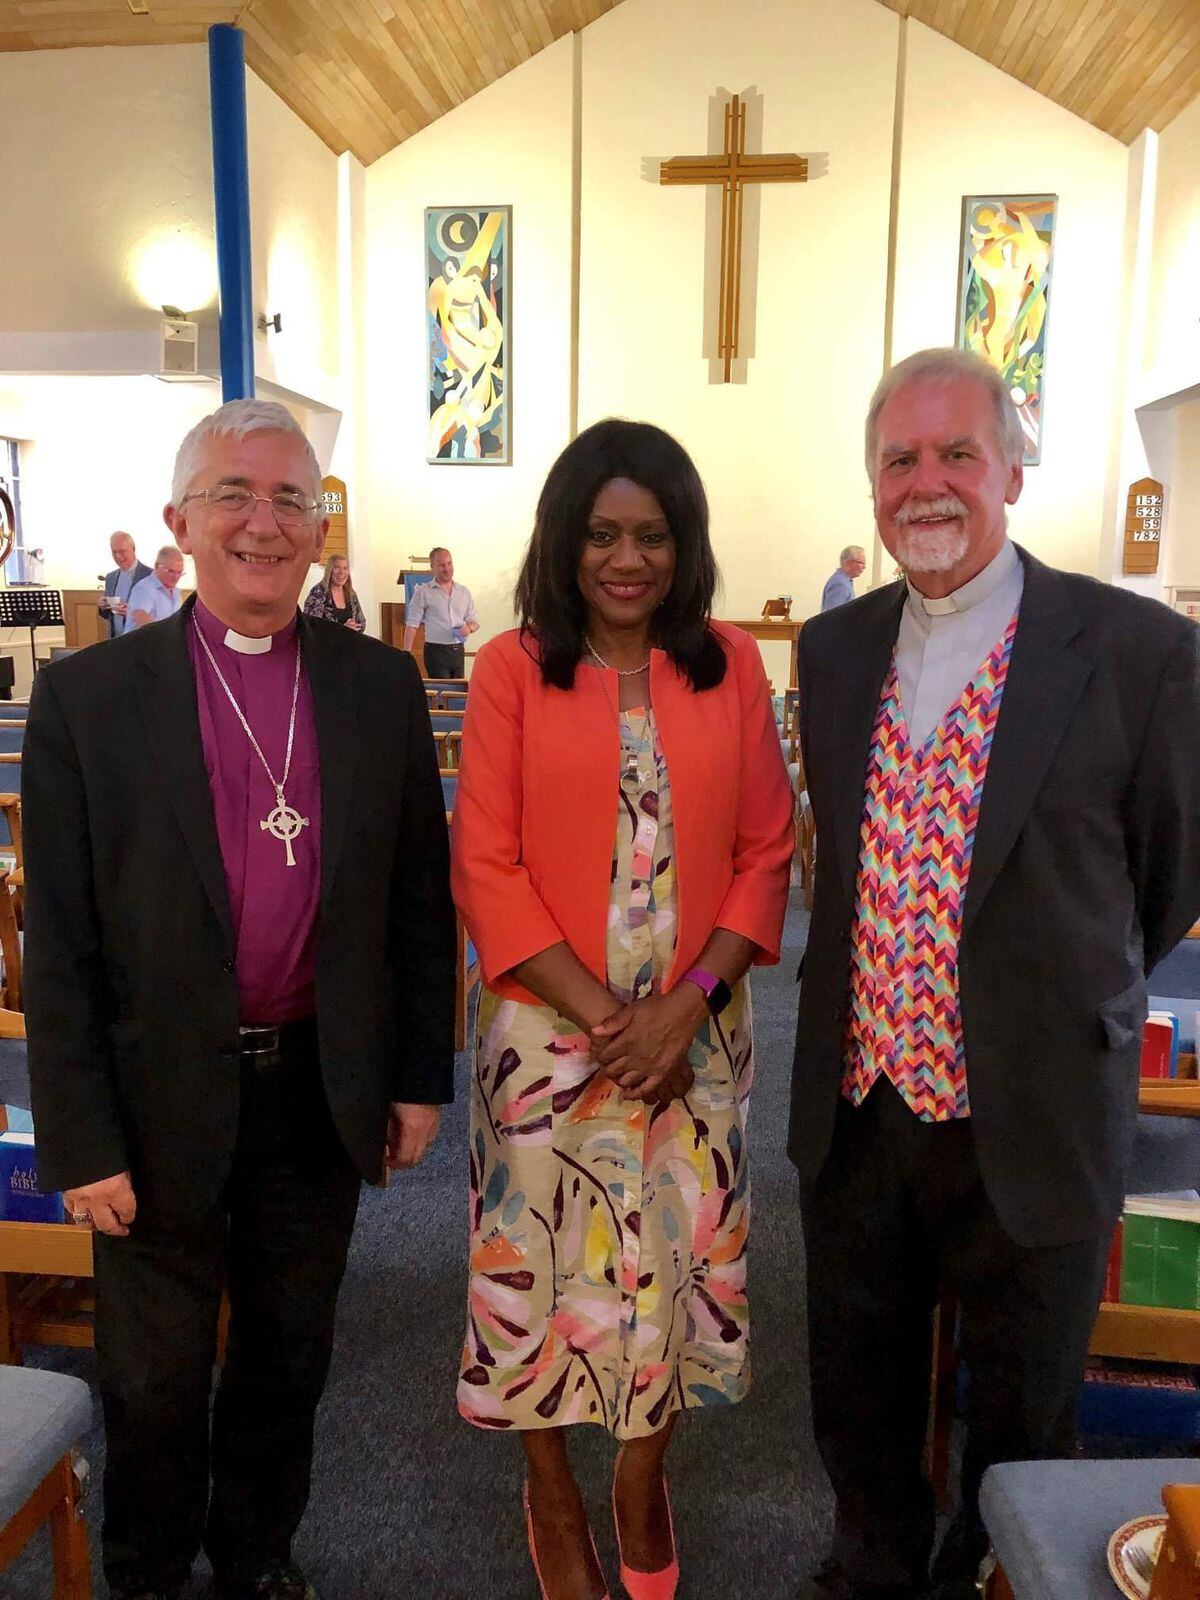 Tim became resident minister in a special service on August 5, attended by Wolverhampton South West MP Eleanor Smith